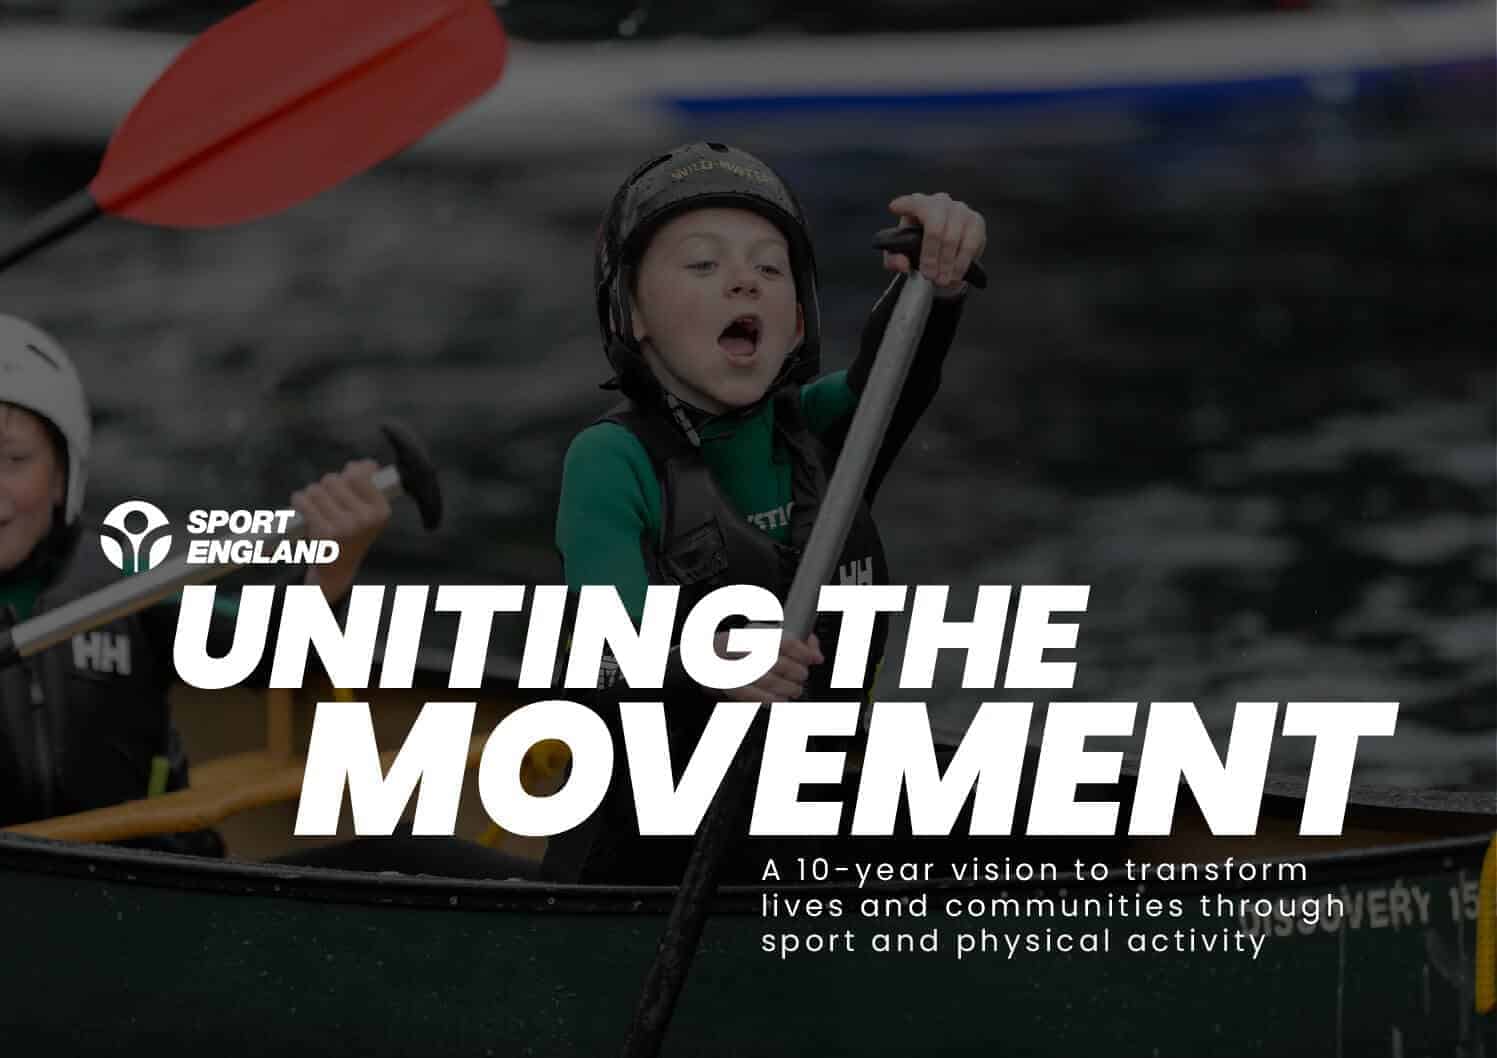 Sport England – Uniting The Movement